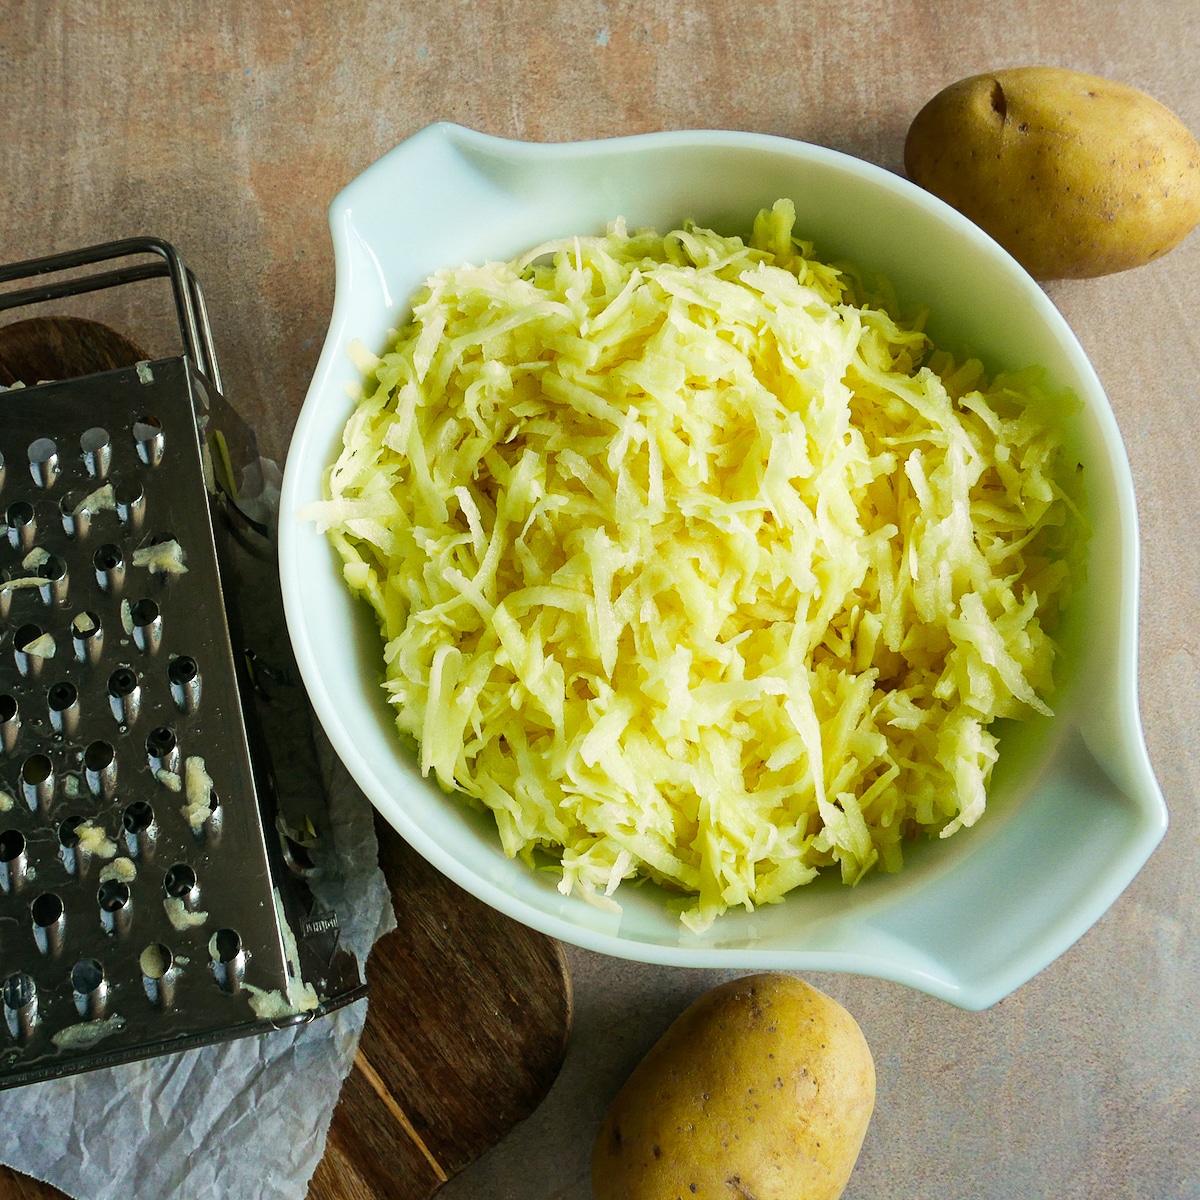 Grated potatoes and onion in a large mixing bowl.